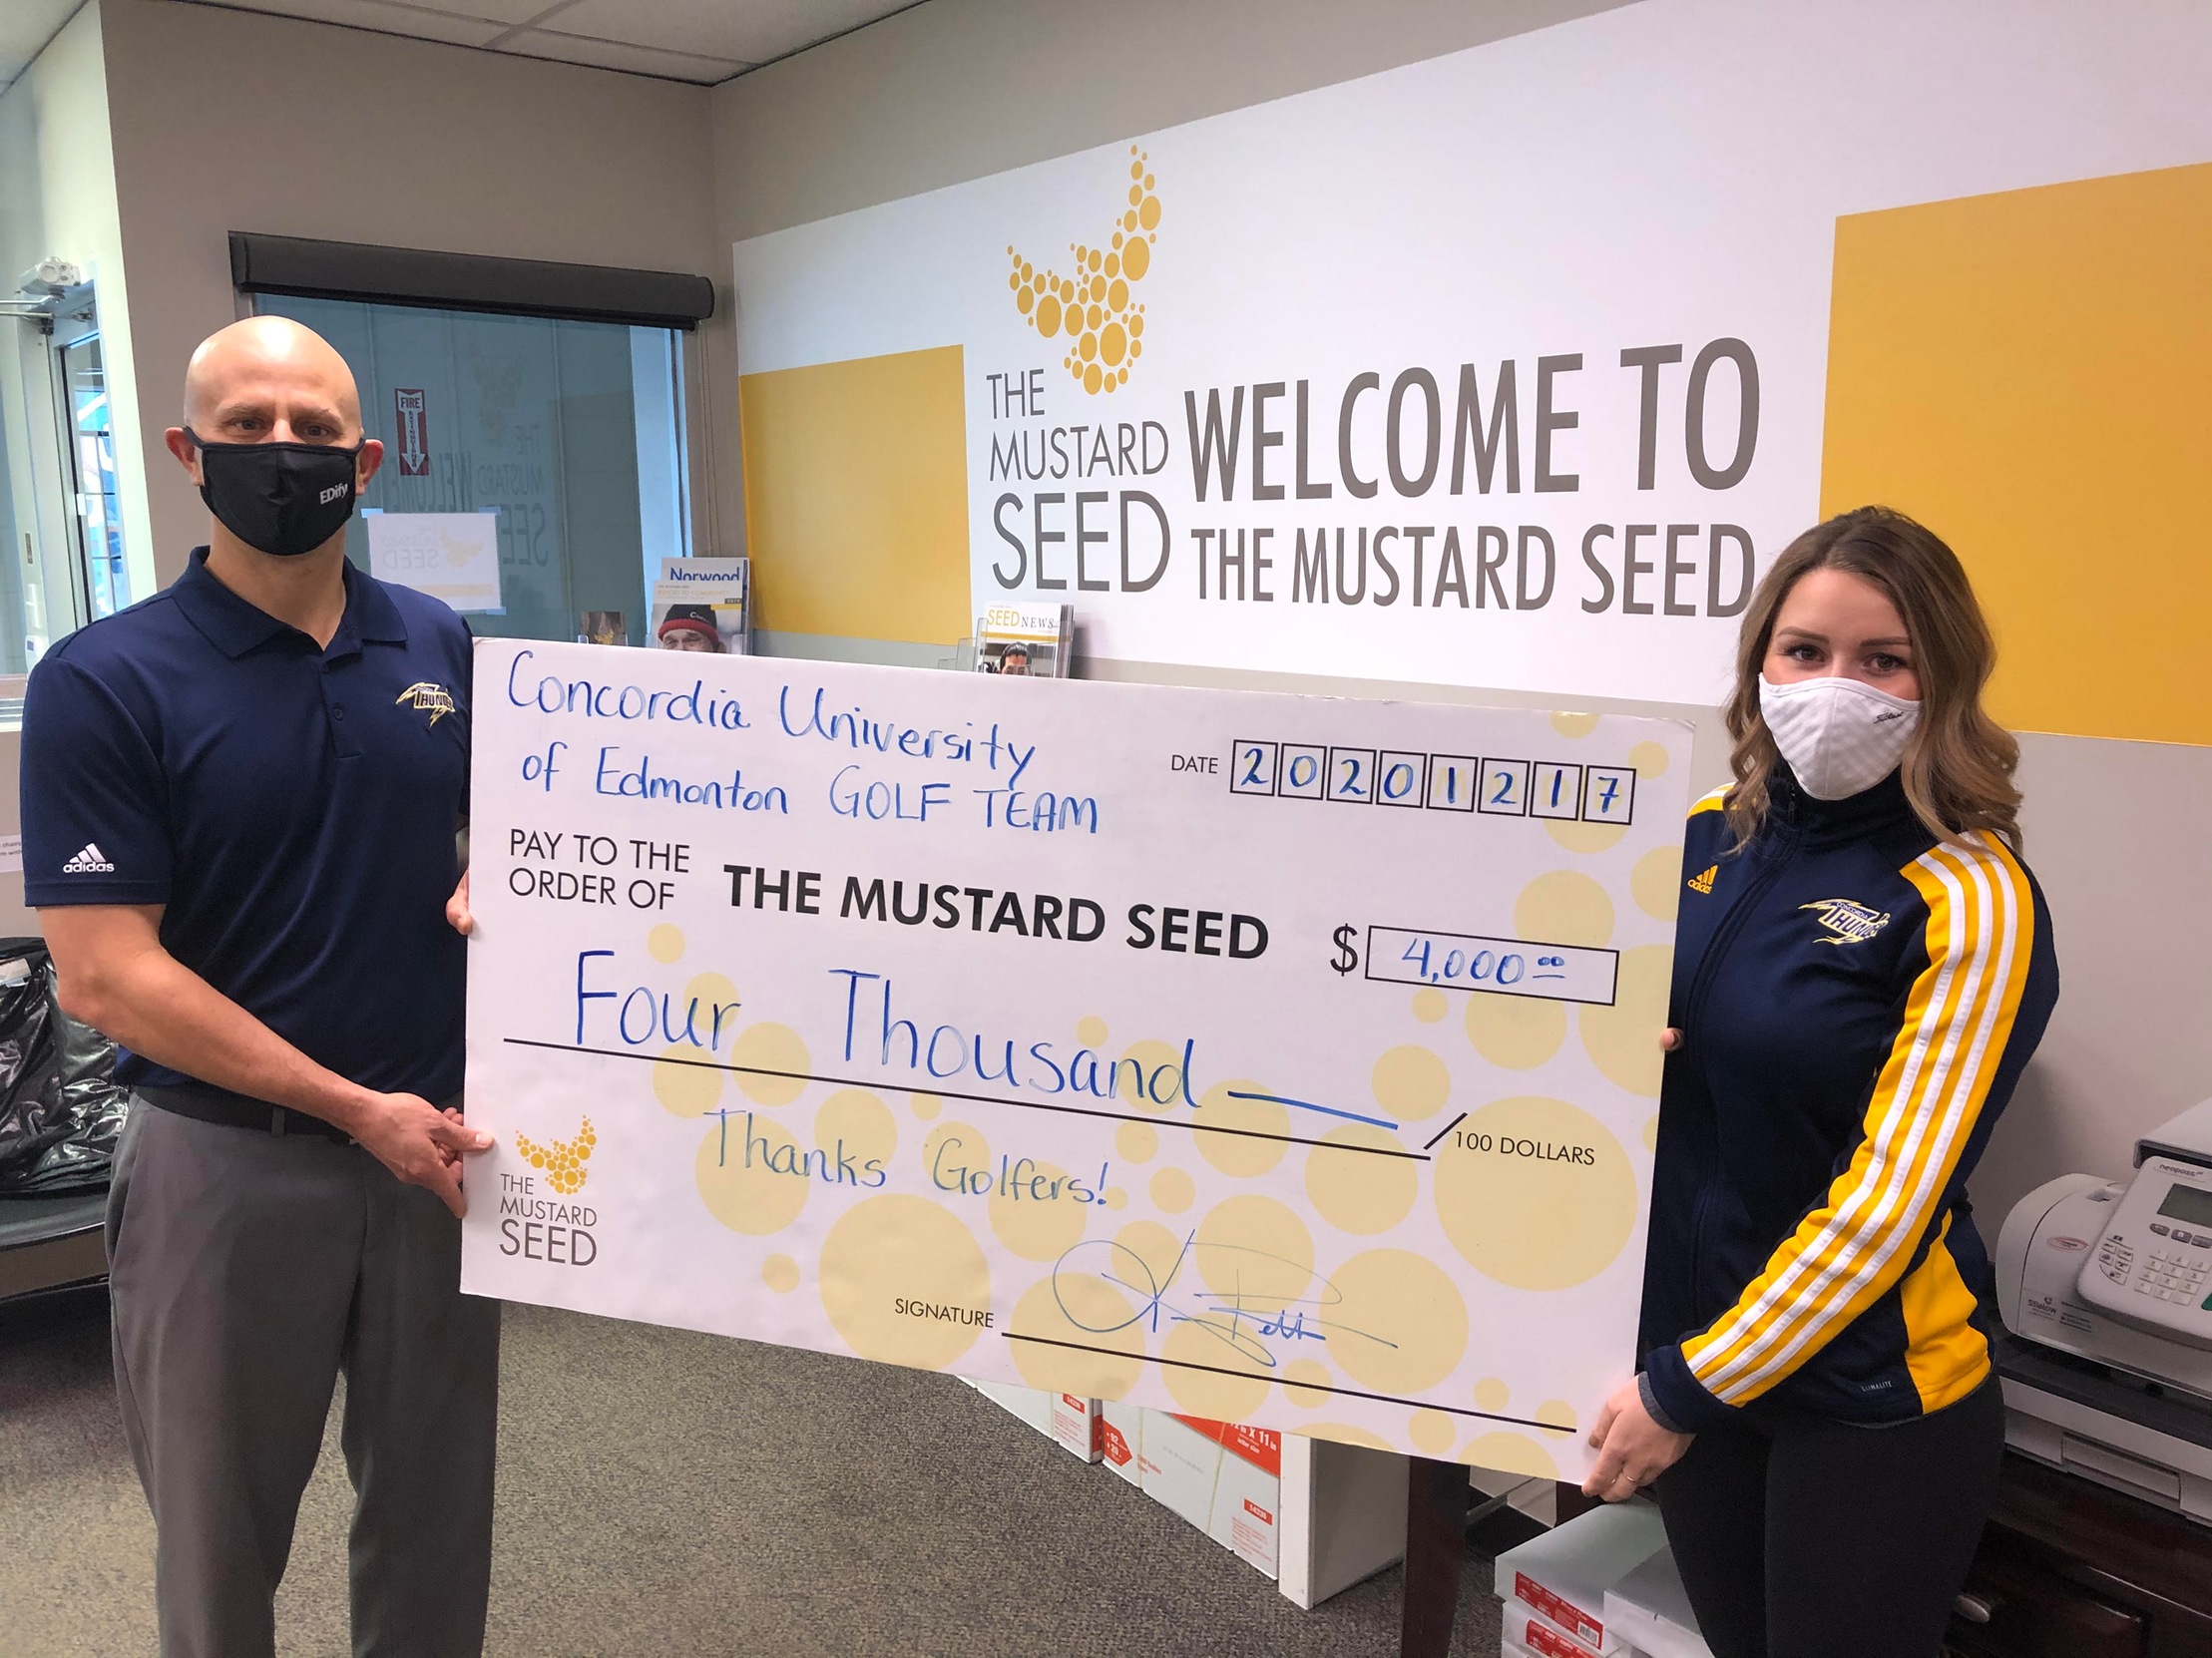 11 Days of Giving - Day 6 - The Mustard Seed